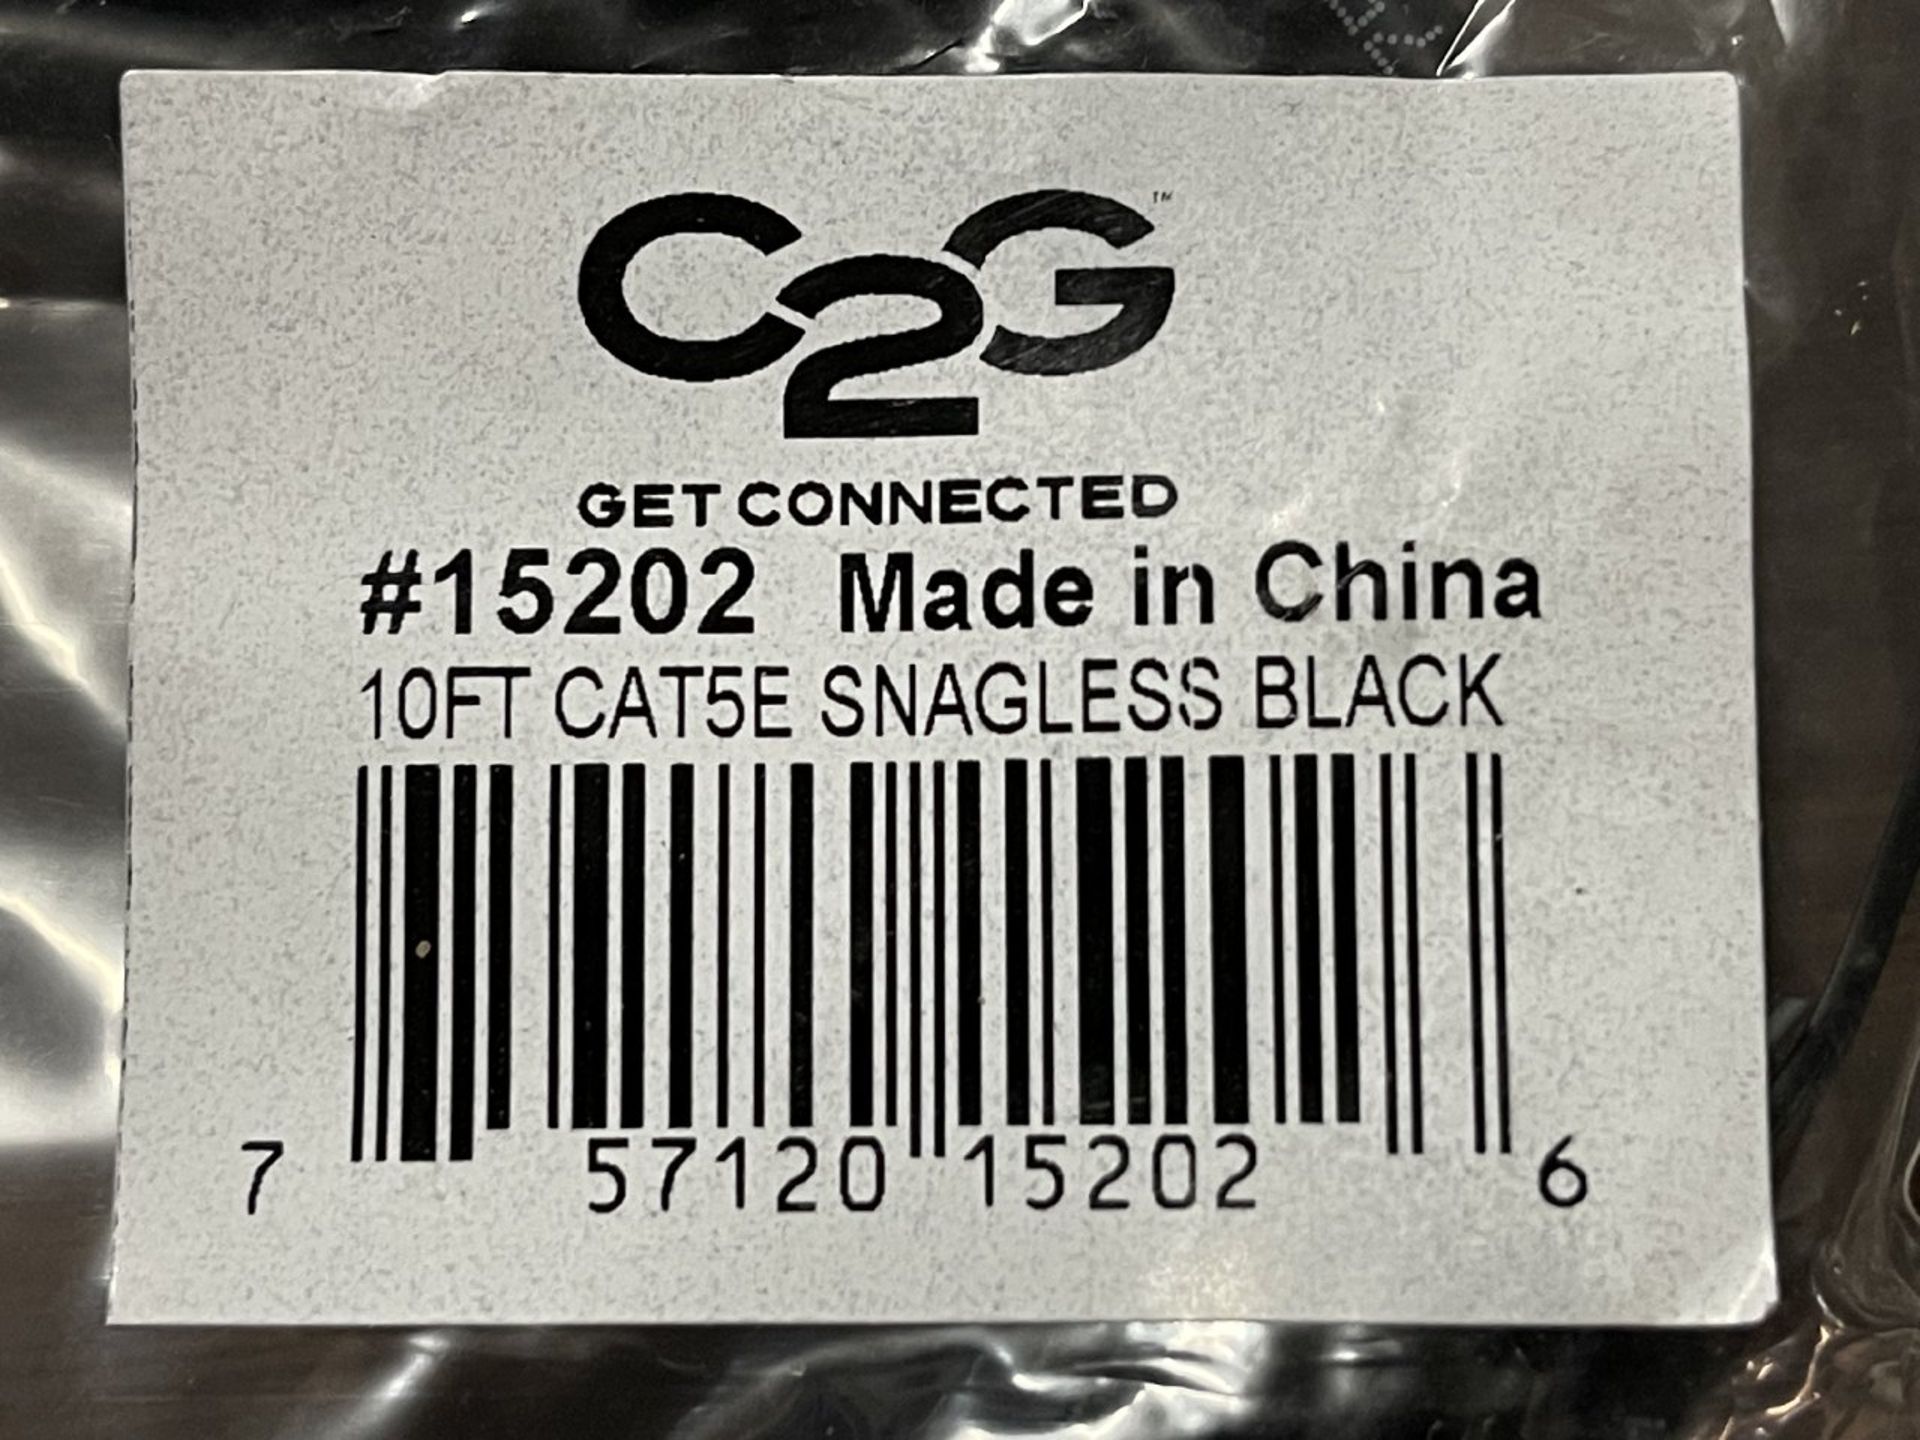 Get Connected C2G 10ft CAT5E Snagless Black Ethernet Cables - Image 3 of 3